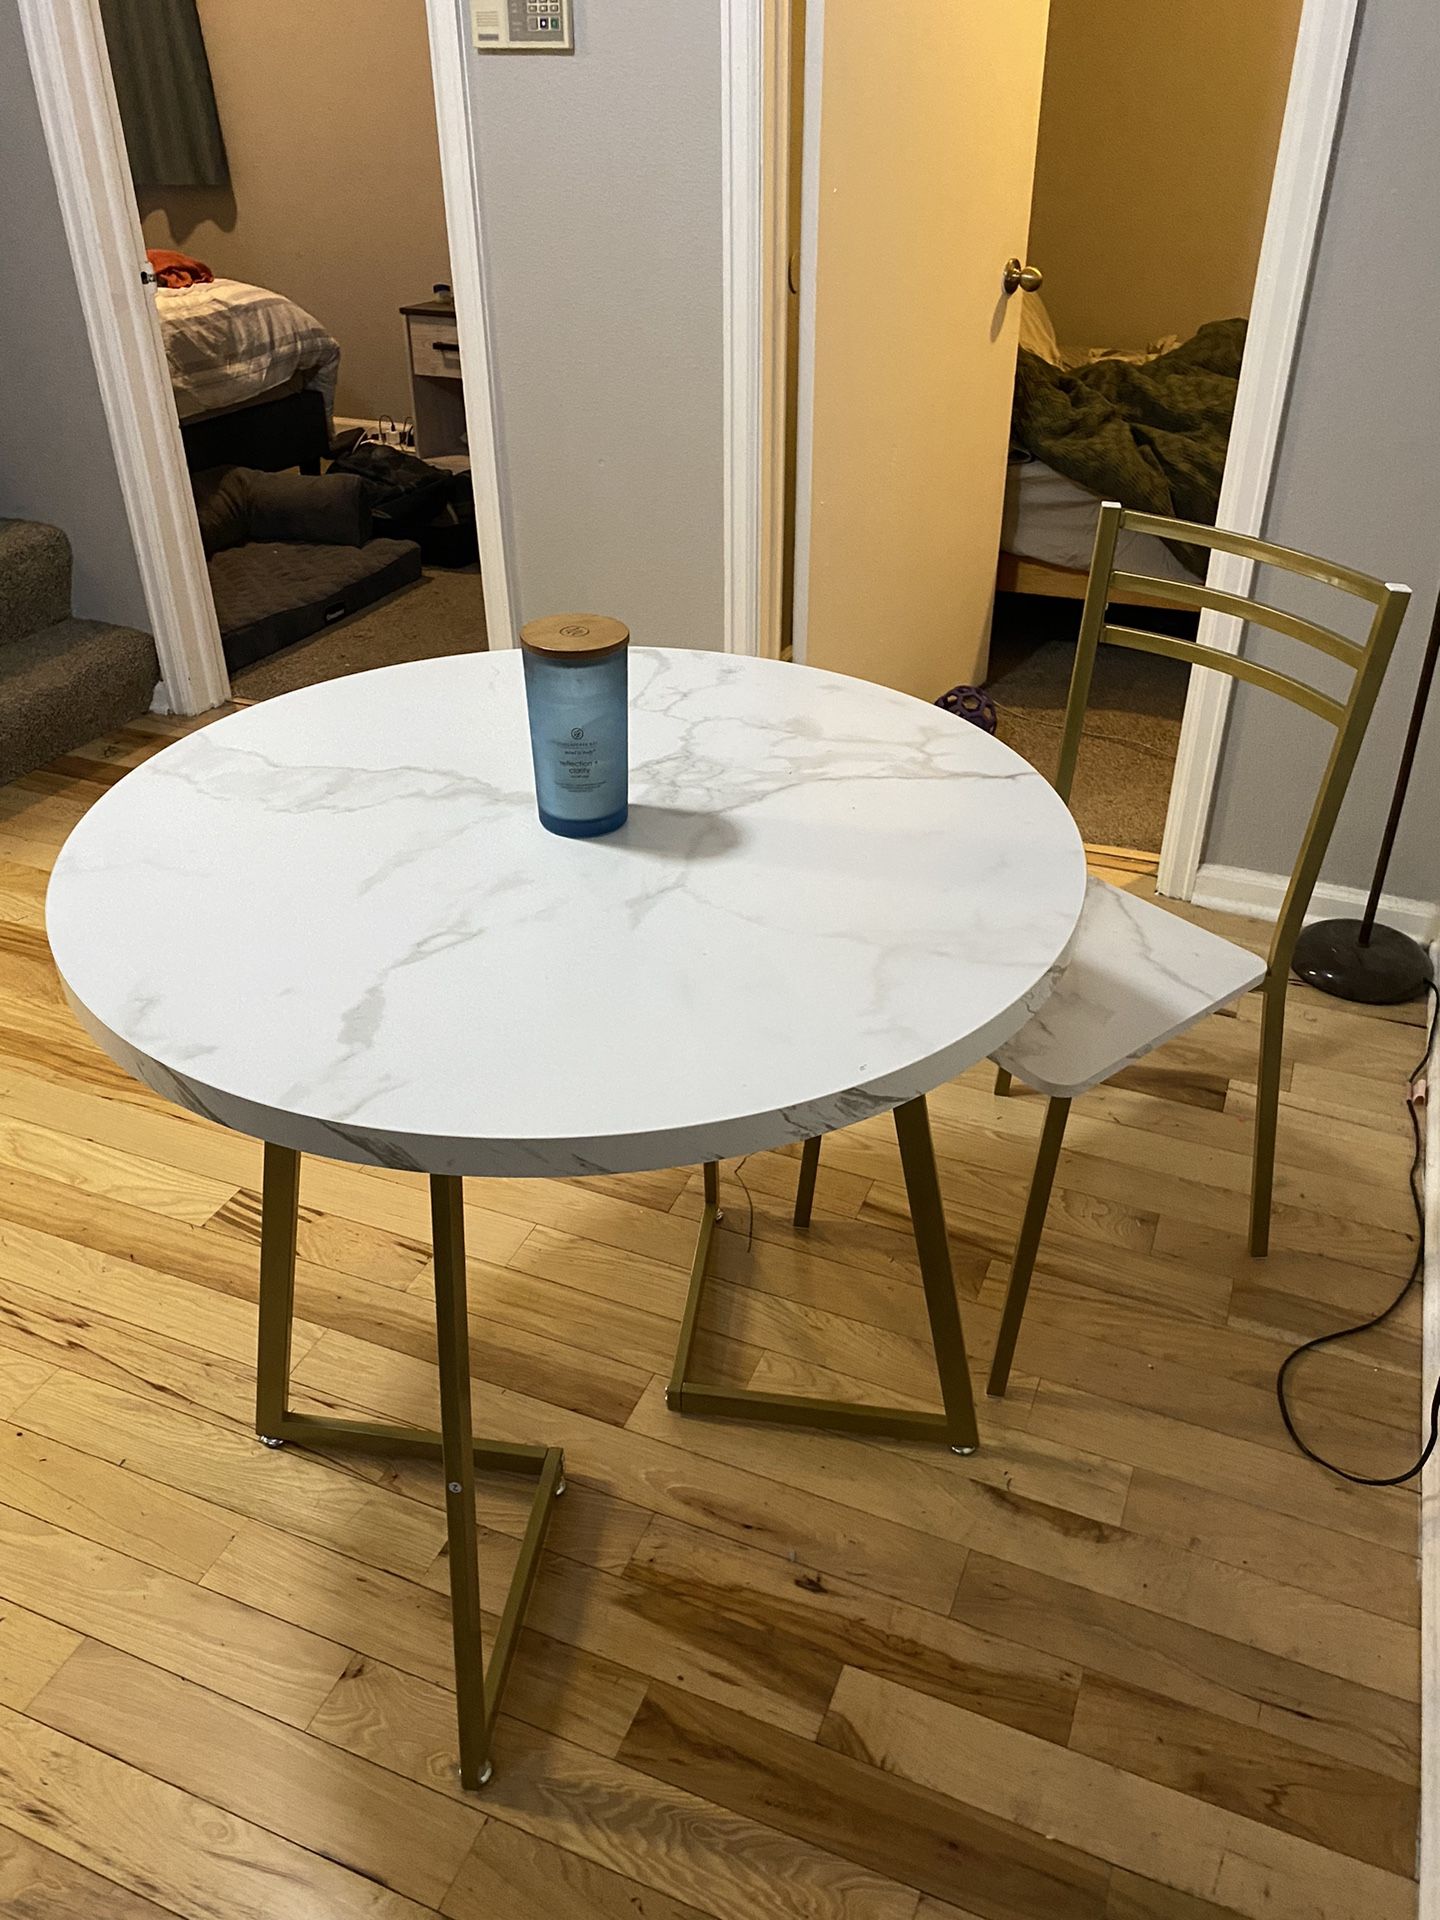 Dining Table With One Chair